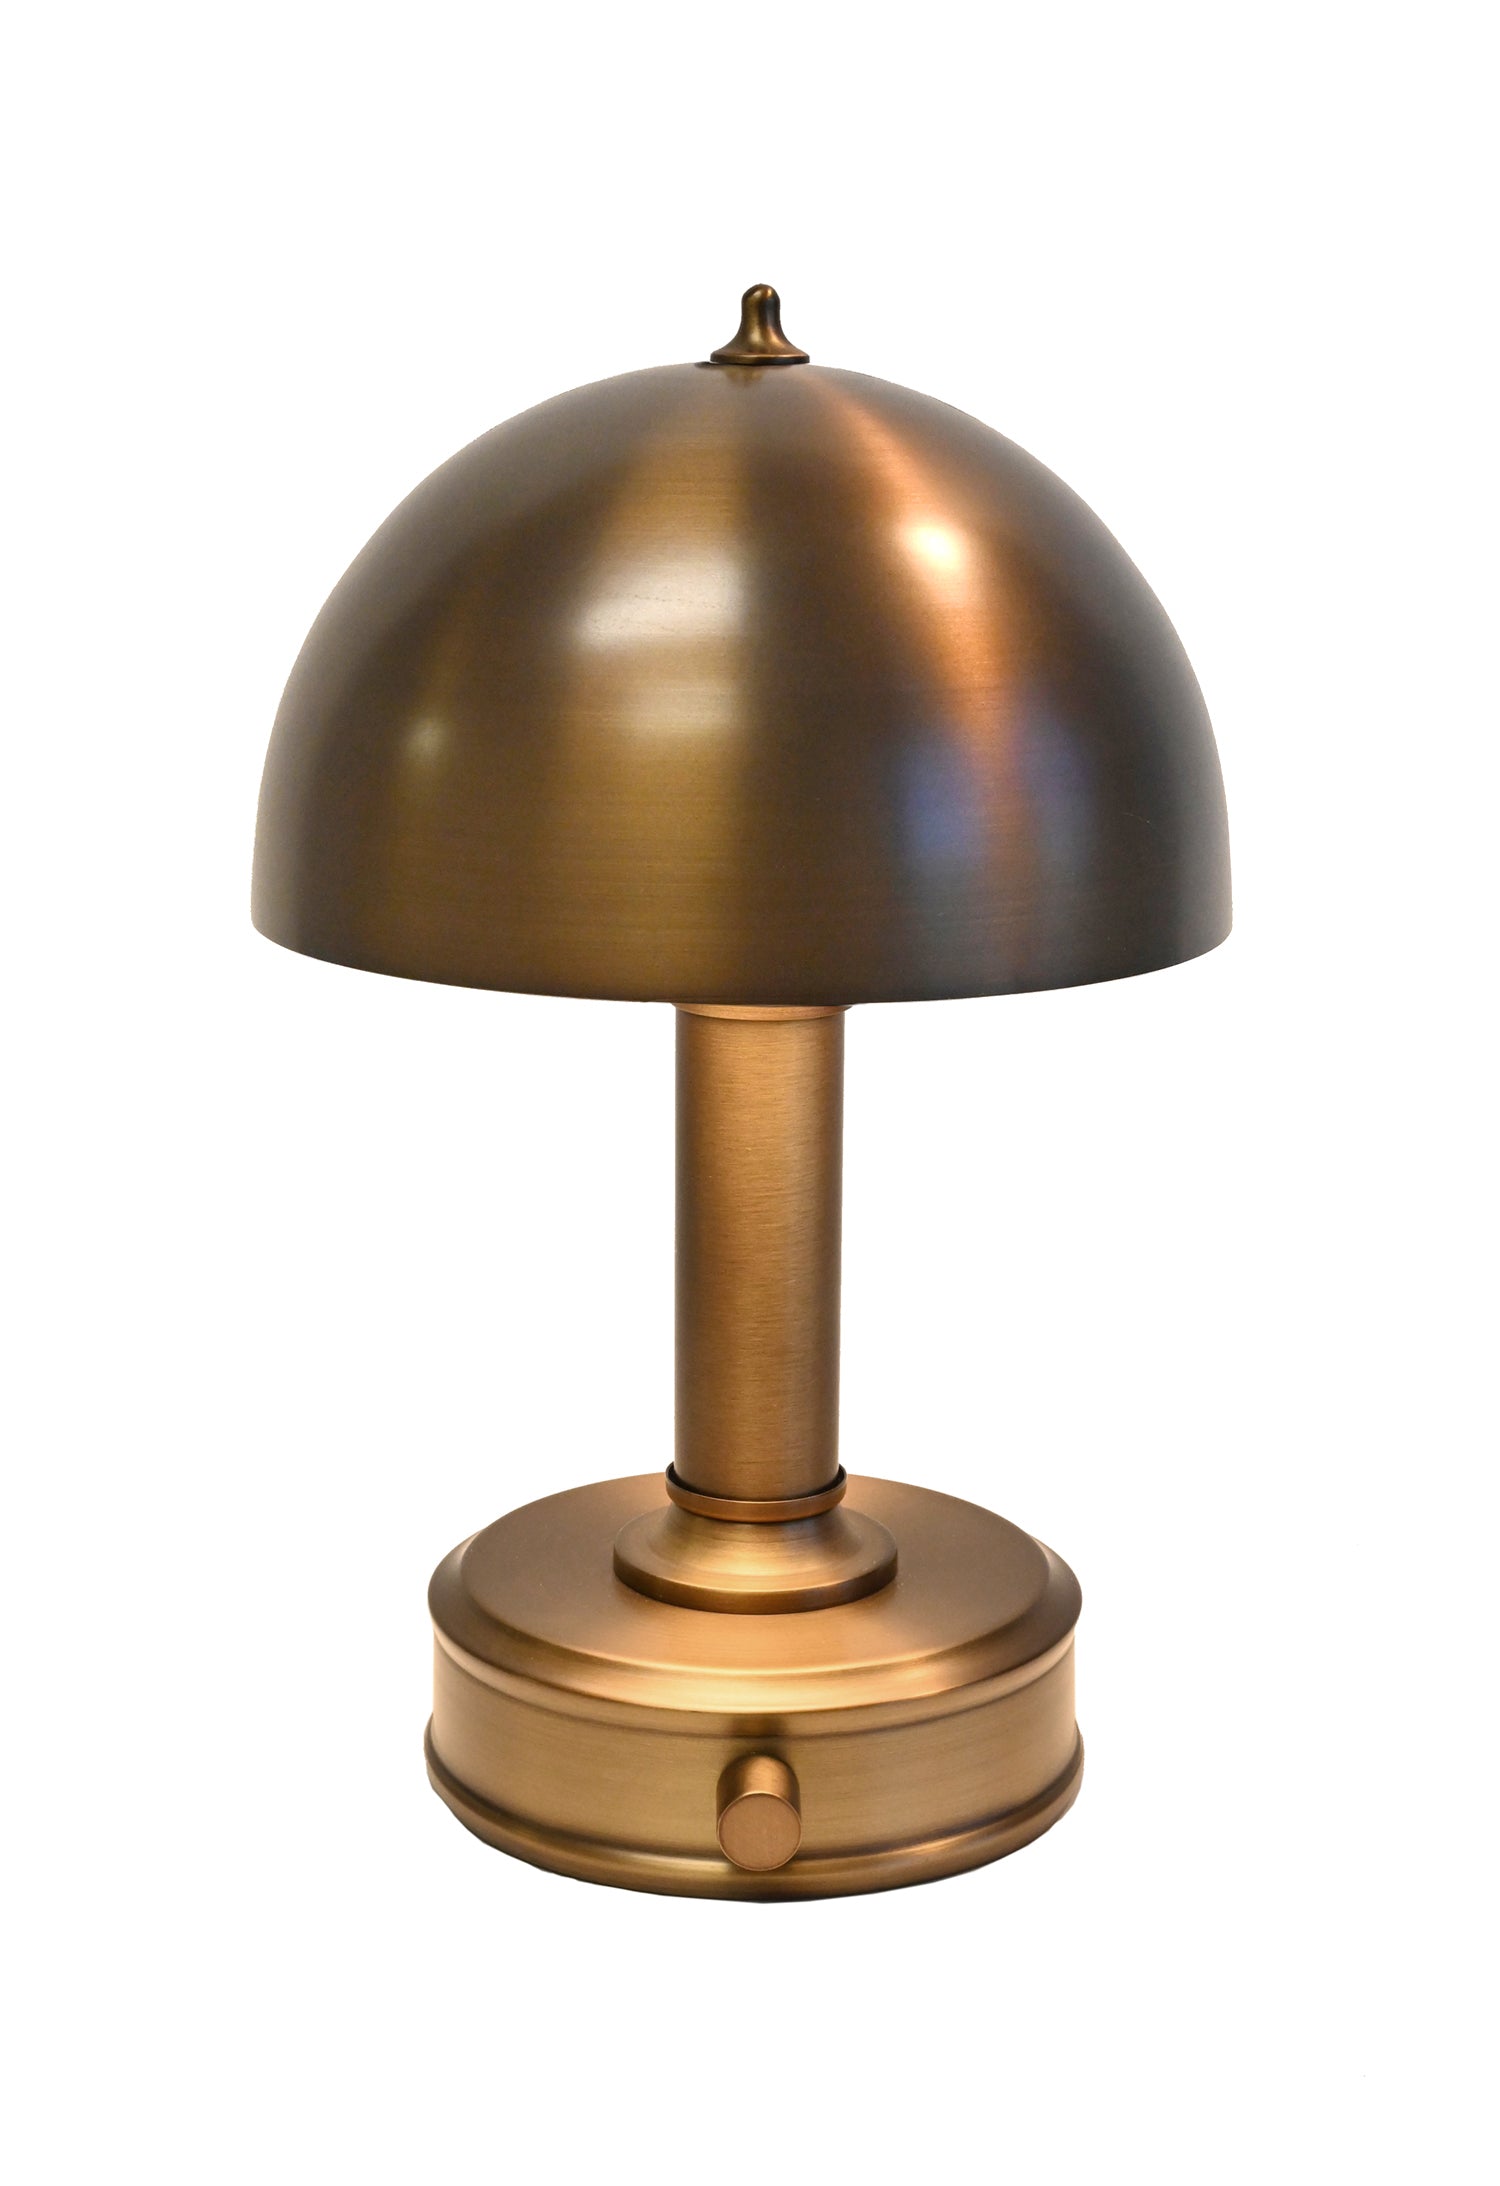 Vintage Industrial brass small table lamp